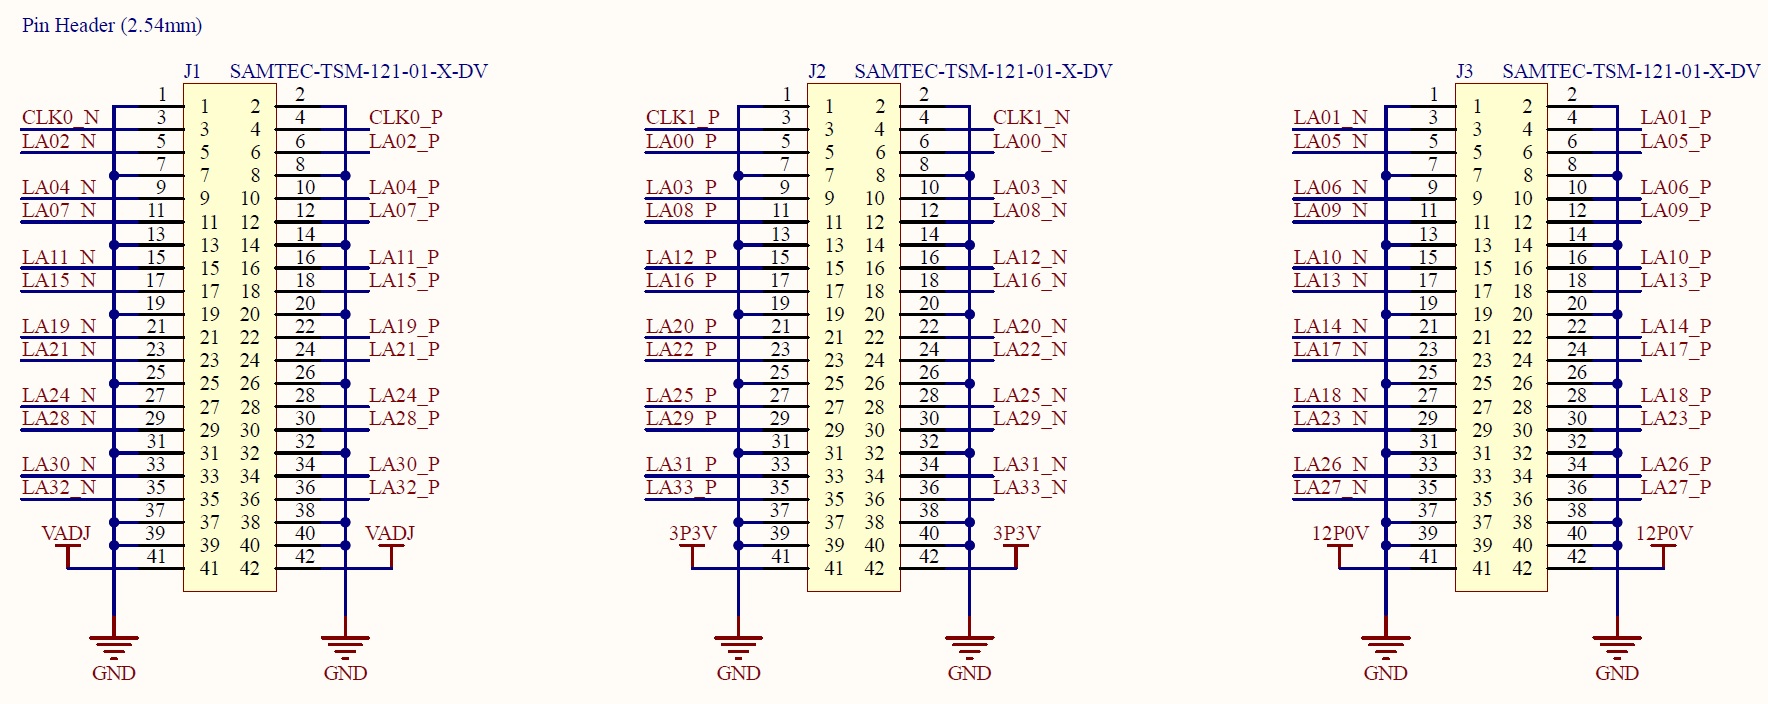 Pin assignments of the FMC Pin Header Board